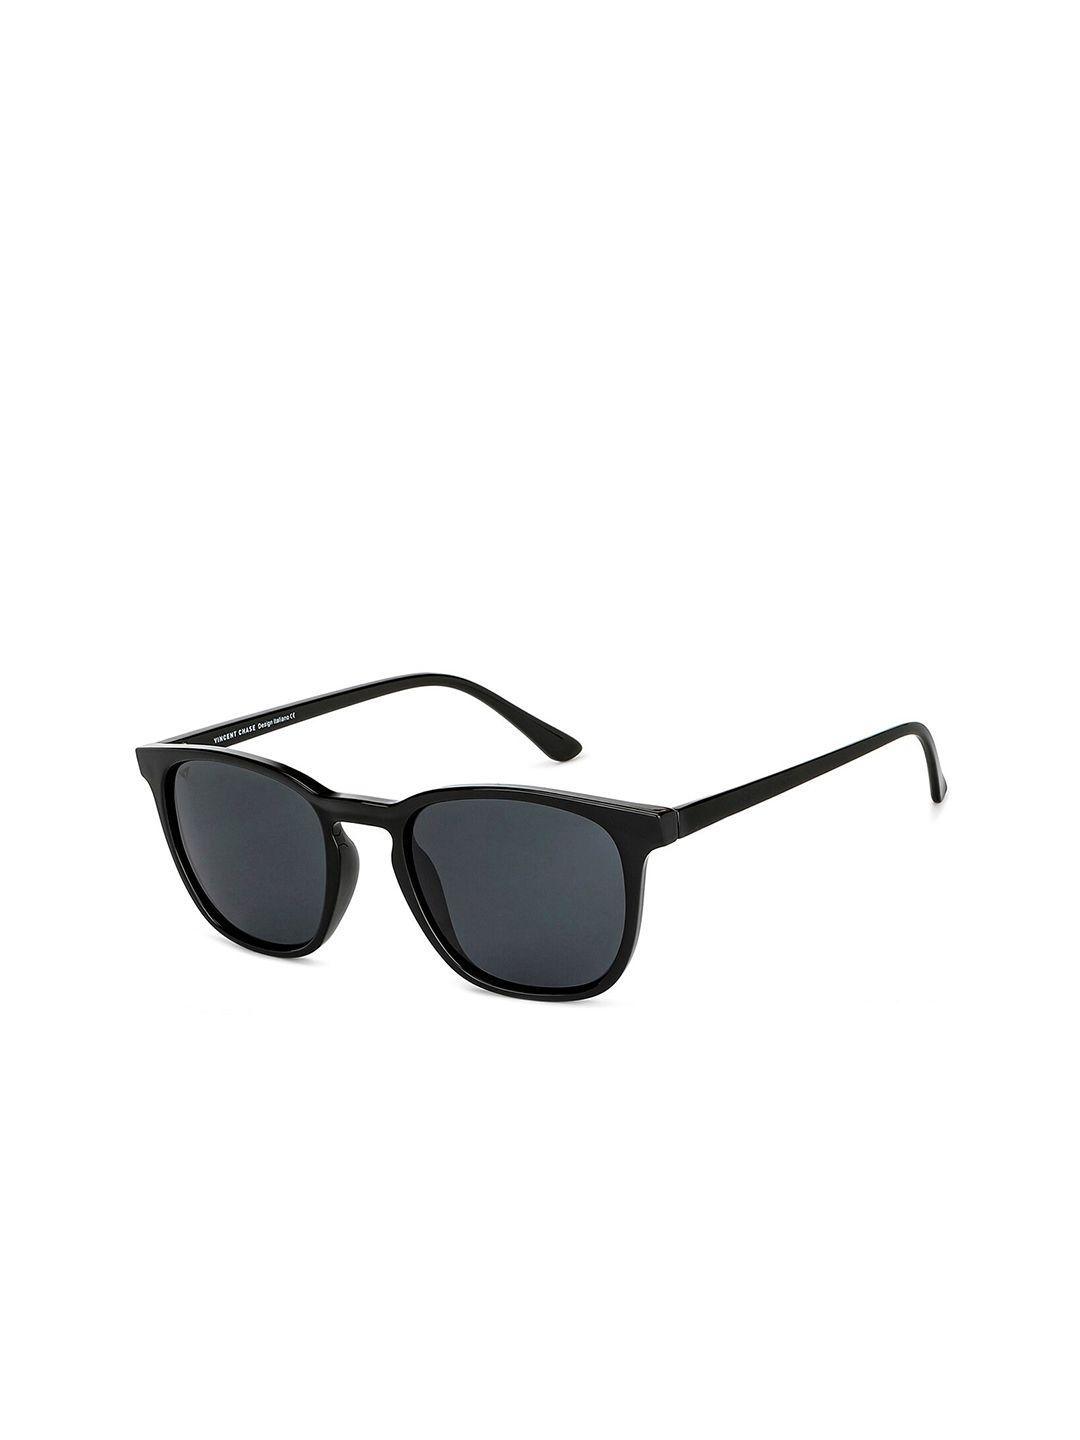 Vincent Chase Unisex Grey Lens & Black Sunglasses with Polarised and UV Protected Lens